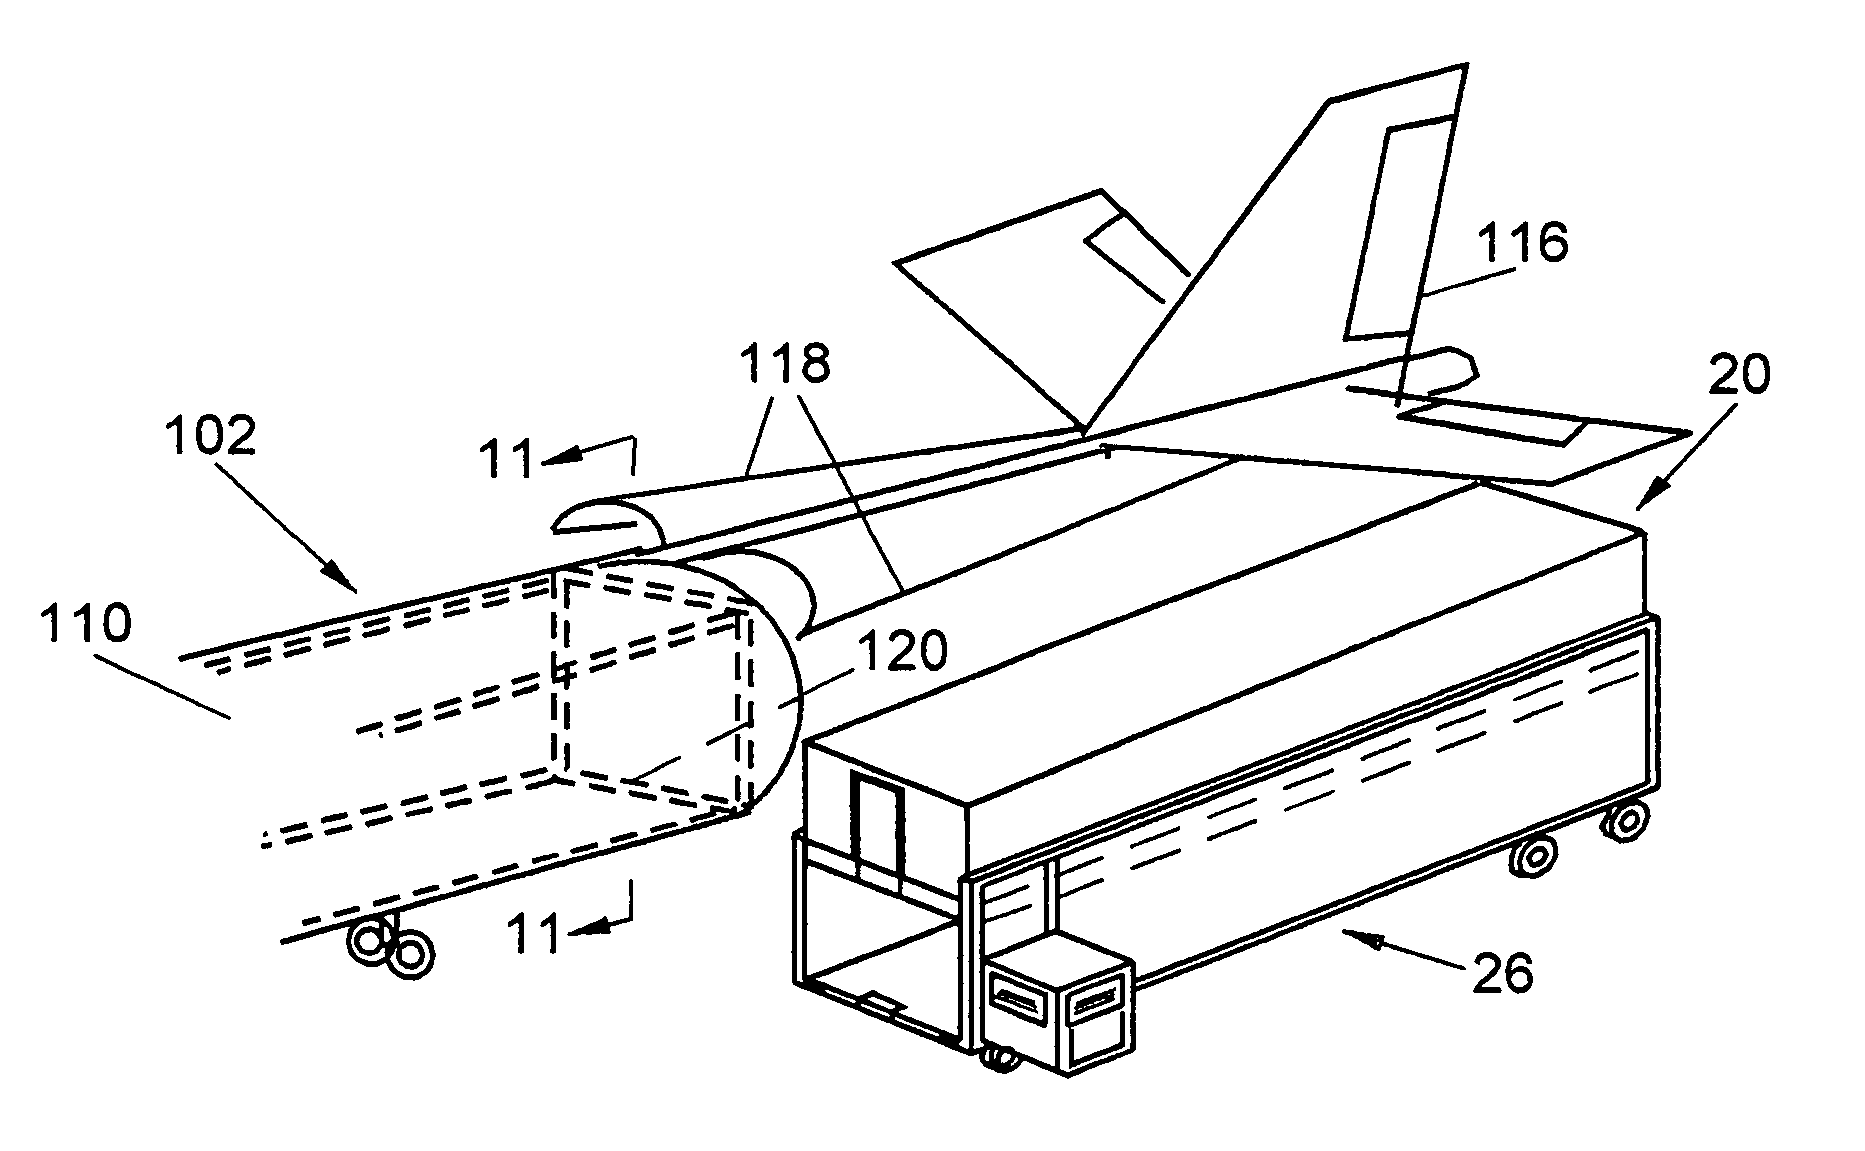 System and method for integrating air and ground transportation of passengers and cargo